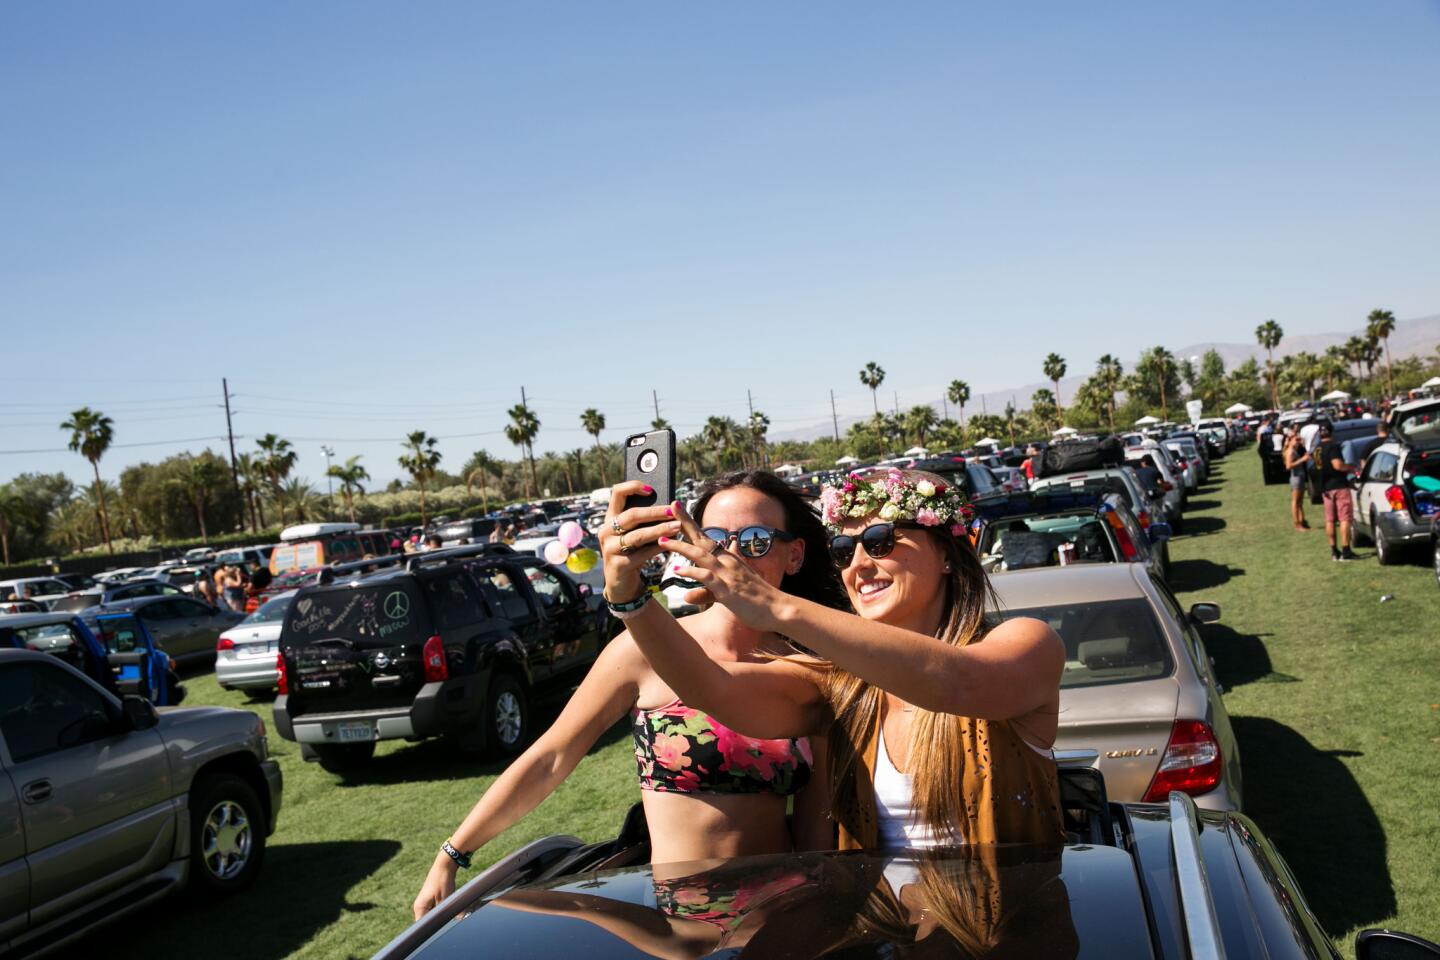 Music fans capture the moment as they wait to get into the Coachella campgrounds in Indio on Thursday ahead of the festival's first weekend.